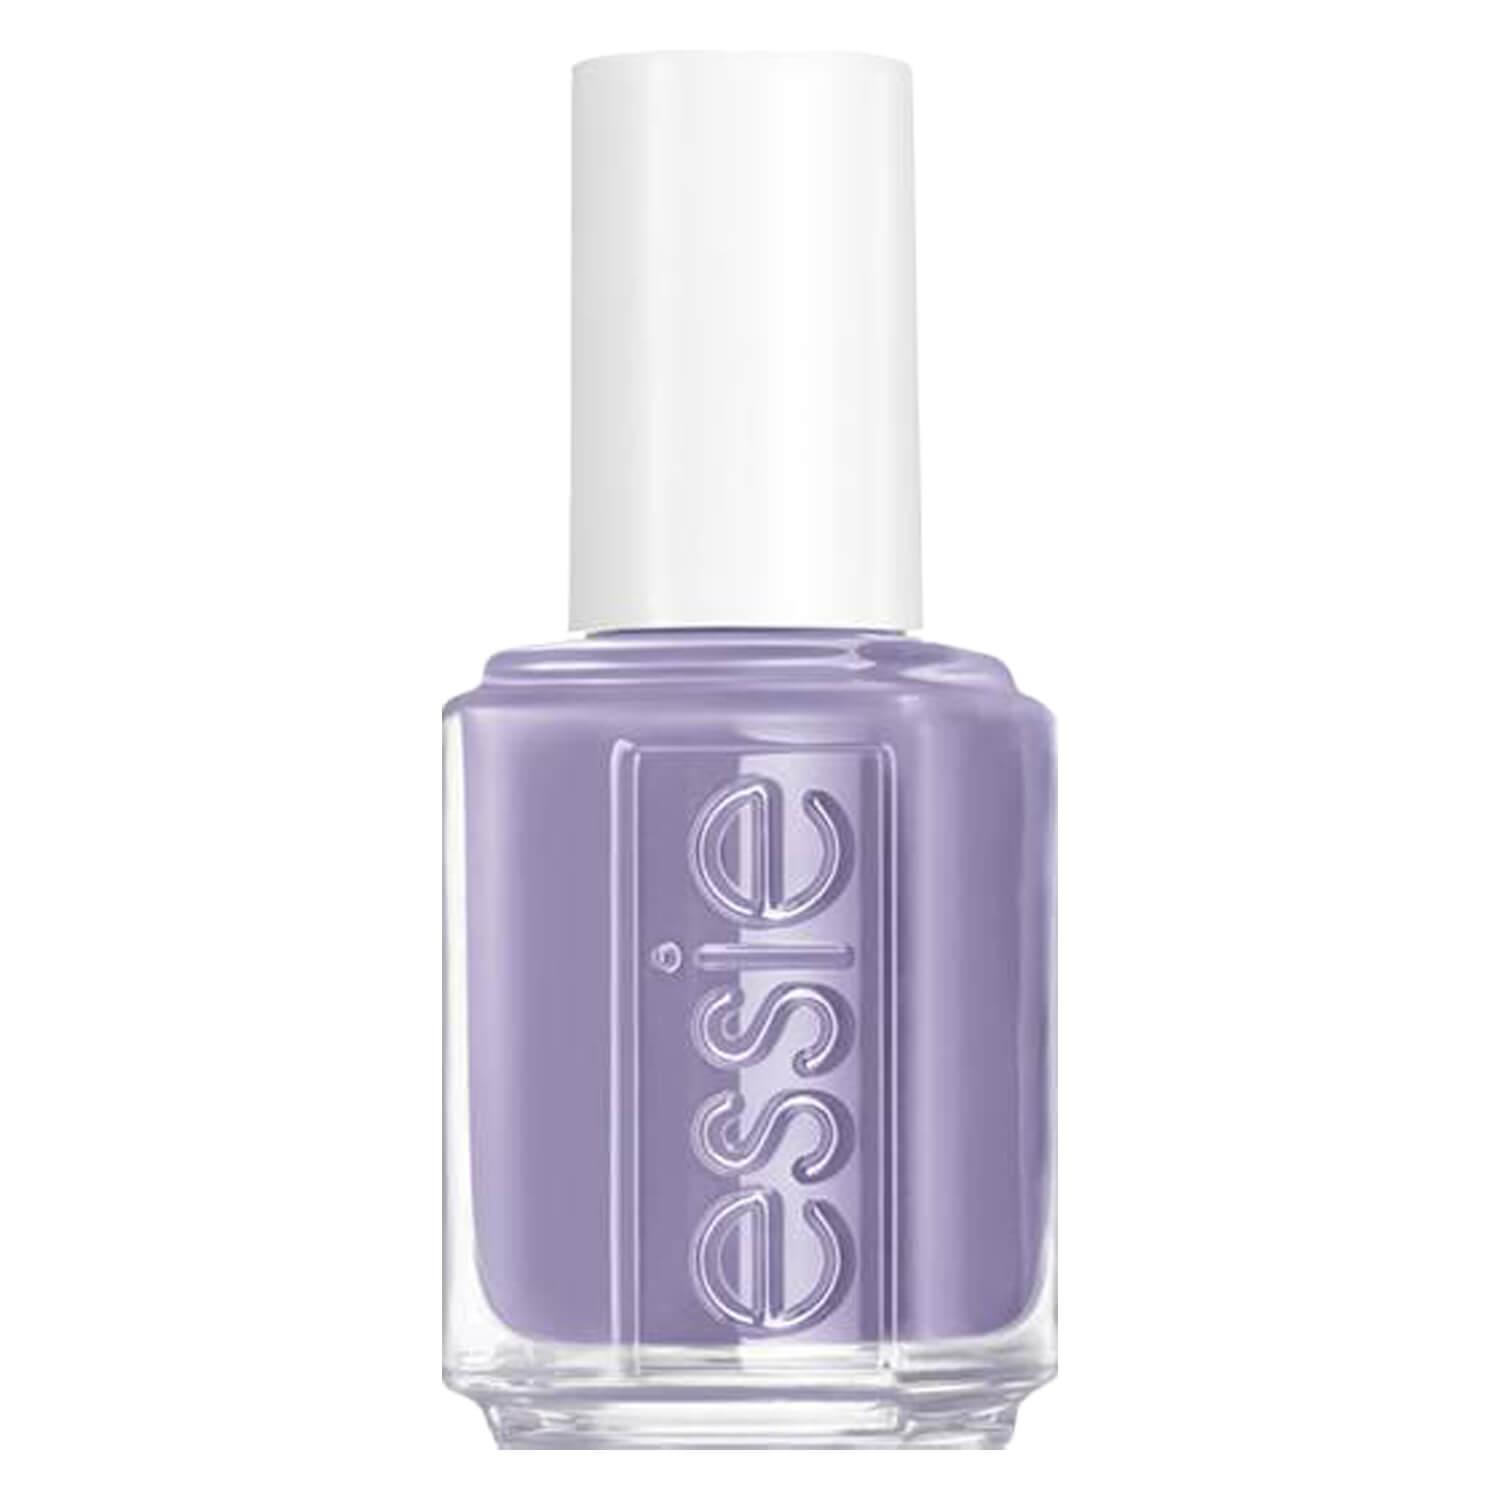 essie nail polish - in pursuit of craftiness 855